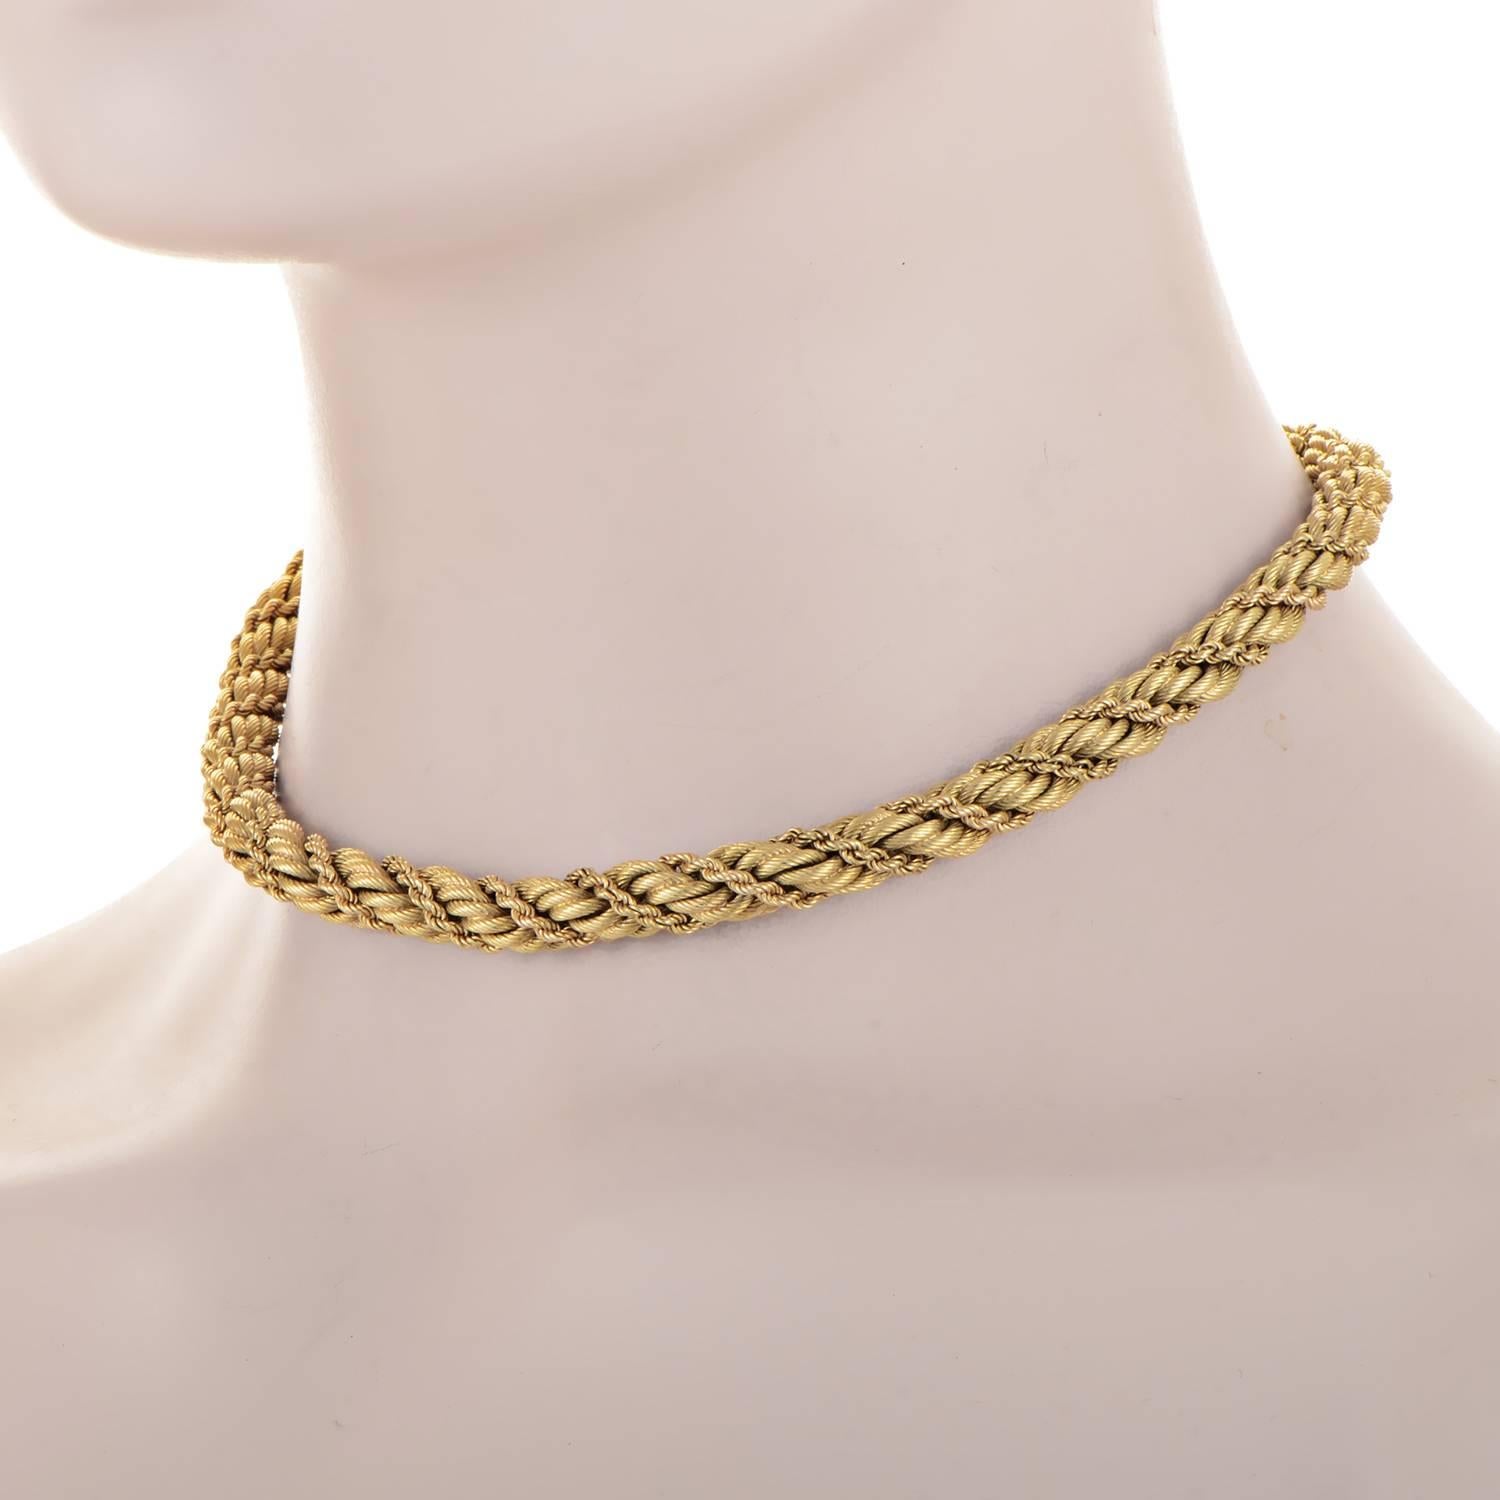 Hearty luxury is a feast for the eyes with this Tiffany necklace design. Multiple threads of 18K Gold are woven with exquisite detail into a ripe chord. The weave of precious metal combines bold and petite lines, perpetuating a dynamic, rhythmic